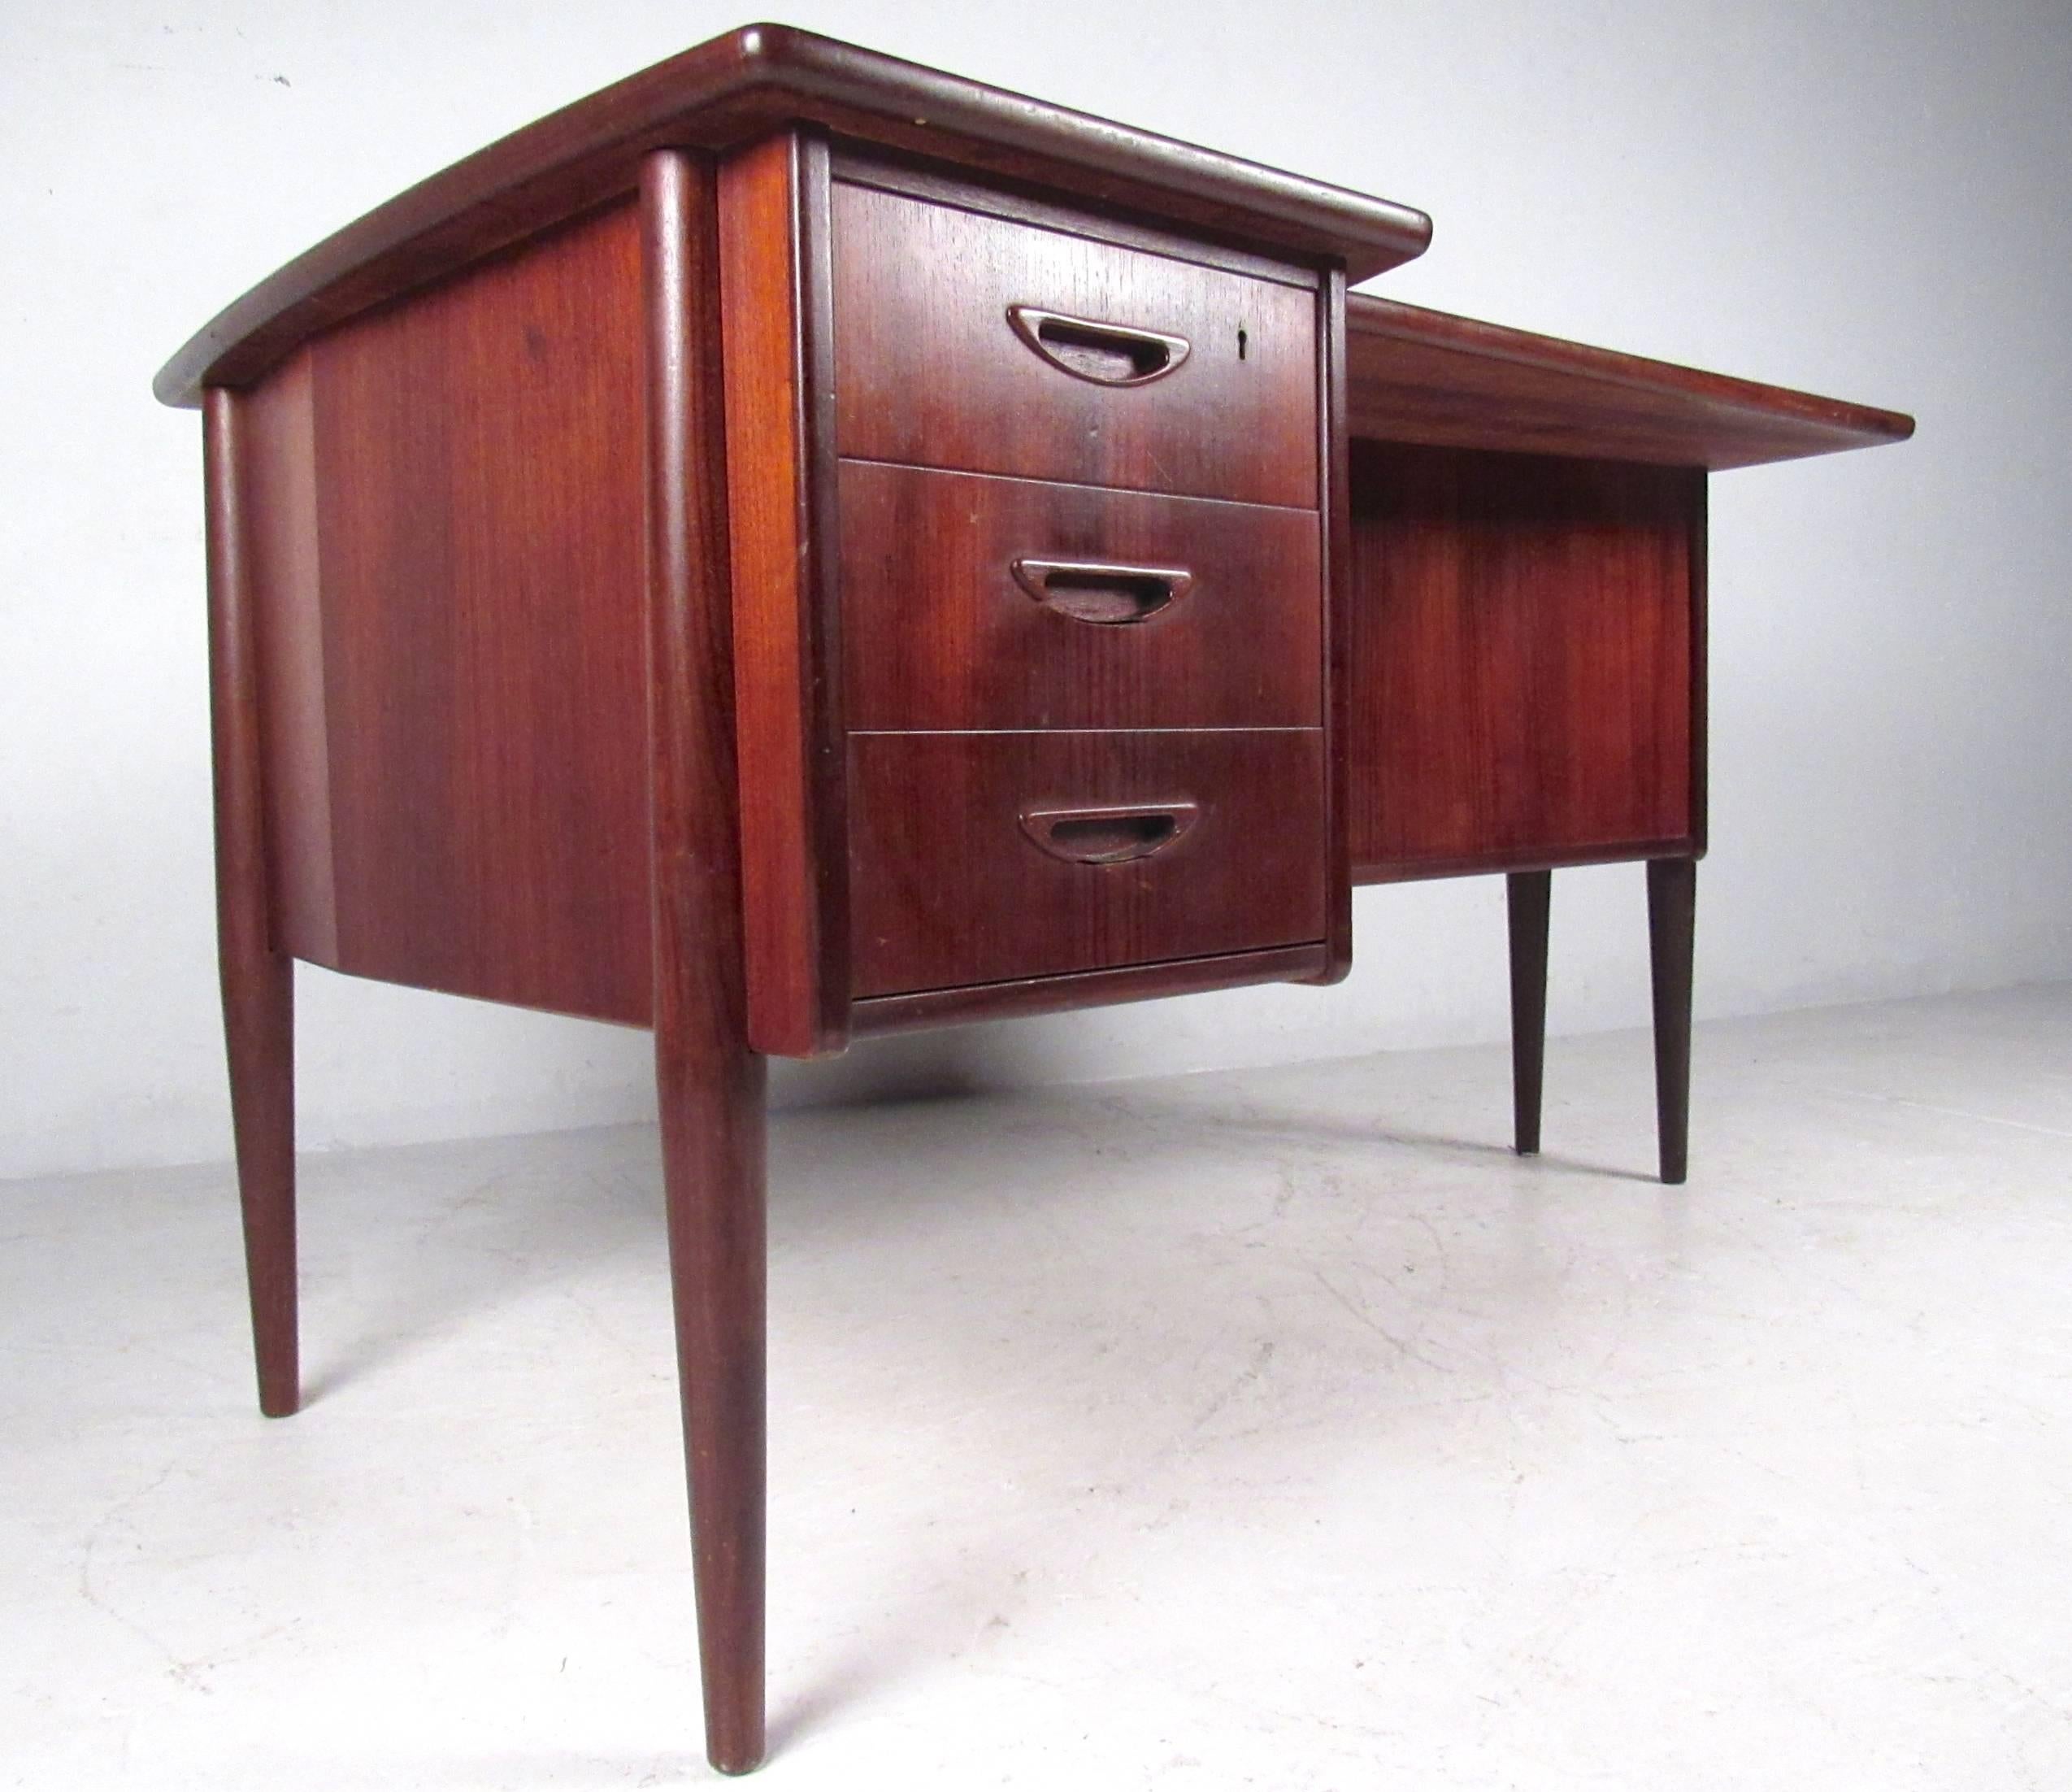 This stylish vintage desk features three drawers for storage and a cutaway style desktop. Natural wood grain finish, raised edges, tapered legs, and additional storage on the desks rear panel make for the perfect mix of storage, style, and usable